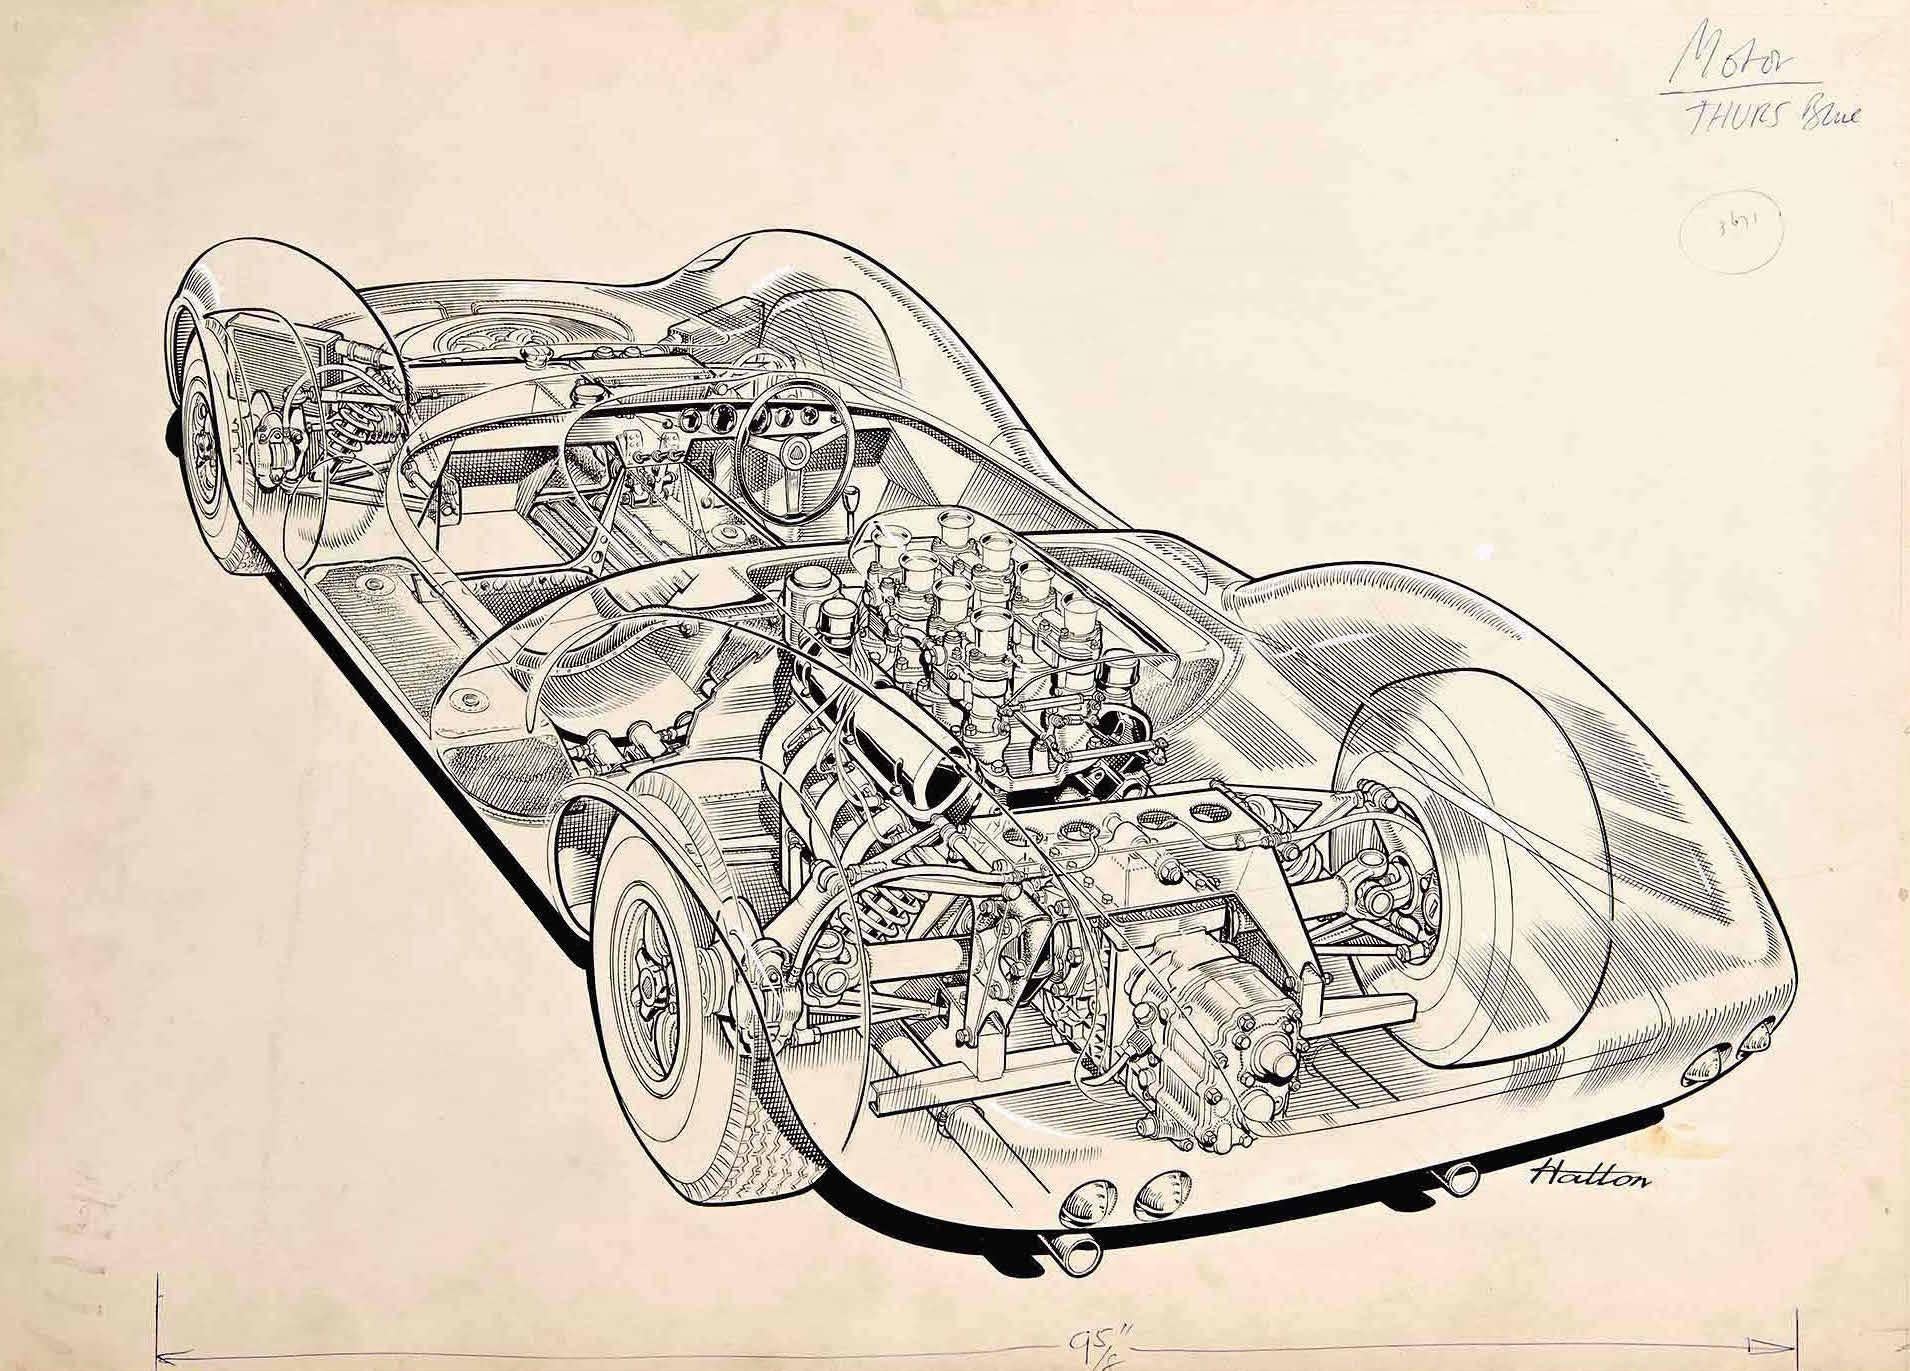 Brian Hatton's painstaking cutaway drawings won him acclaim as one of Britain's great technical artists. This meticulously detailed pen and ink drawing (on illustration board) of the beautiful but ill-fated Lotus 30 sports racing car is the original